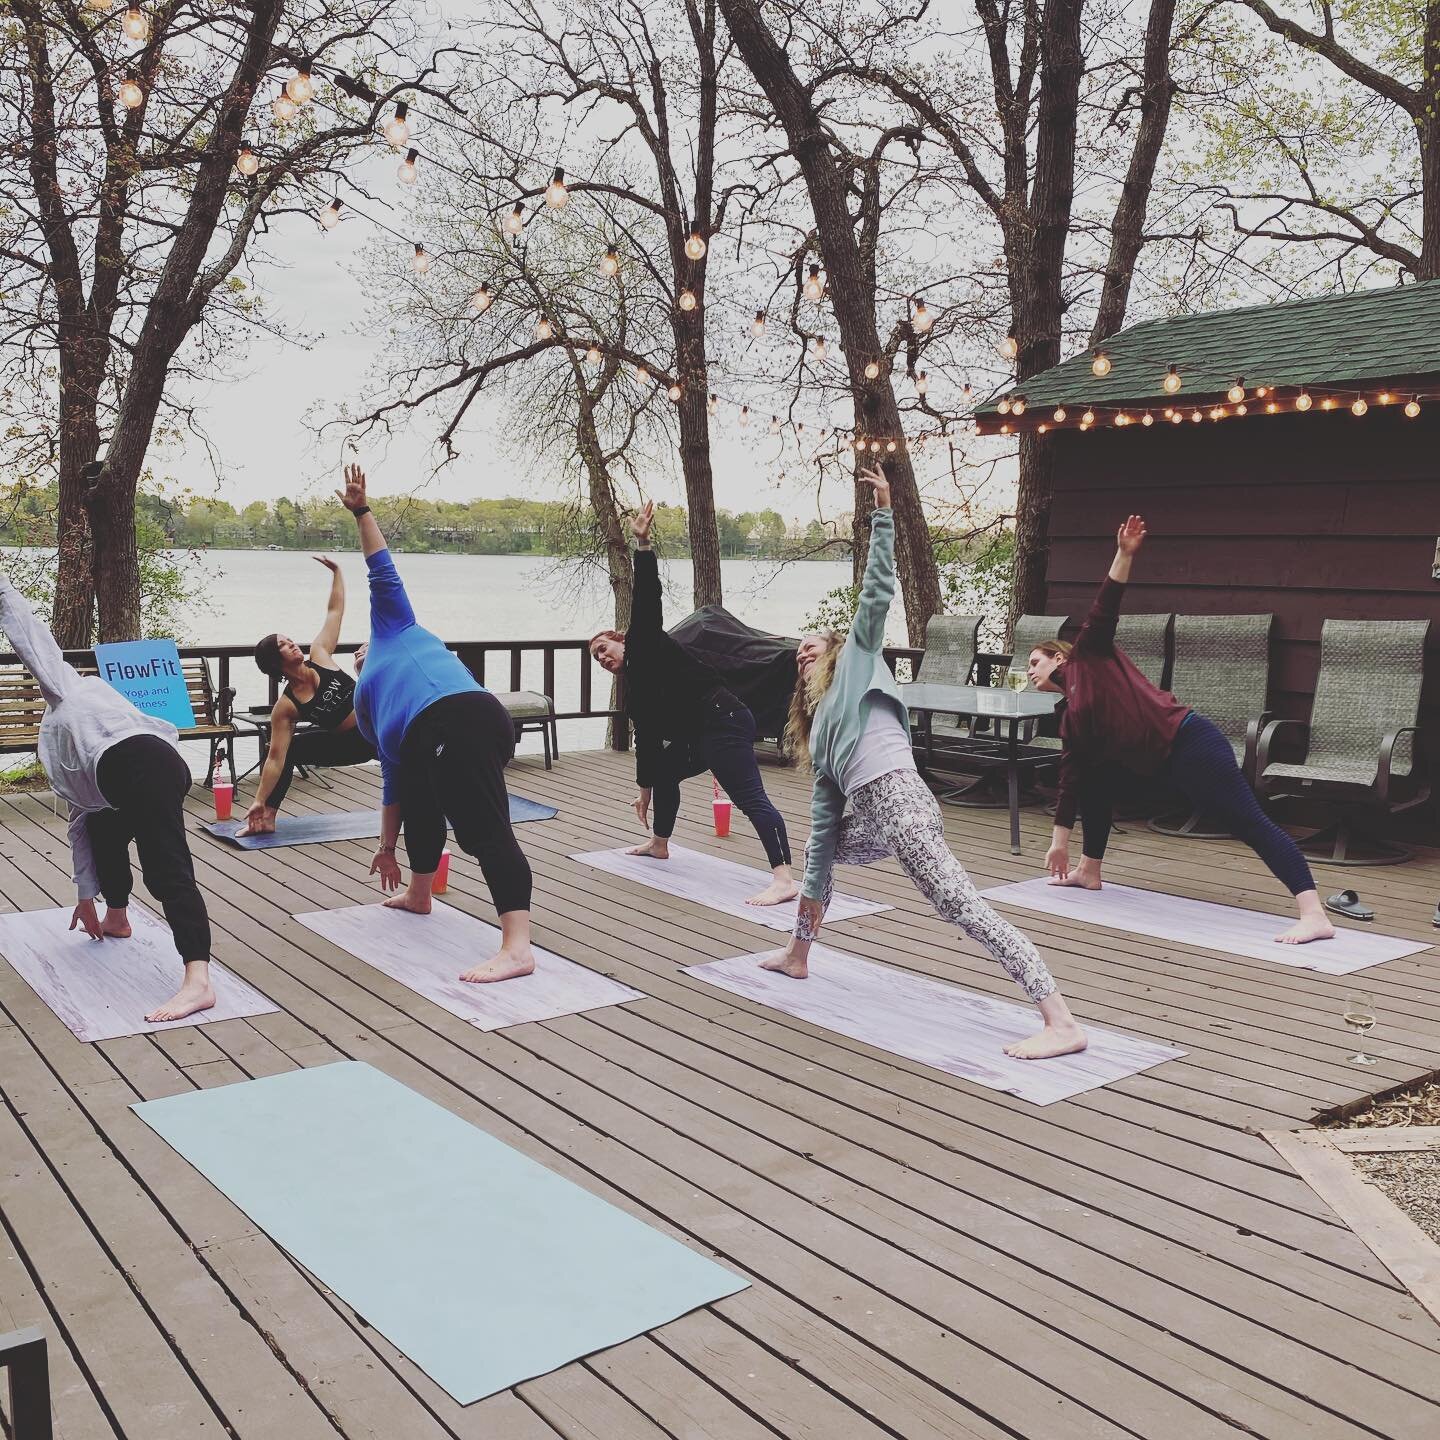 ✨SALE✨ 

We only have a couple more spots available for our retreat Sept. 23-26th save 10% if you book NOW! 
-Wellness
-Community 
-Wine Tasting
-Mental Health and Balance Workshops 
-Great Food 
-FUN! 🎉